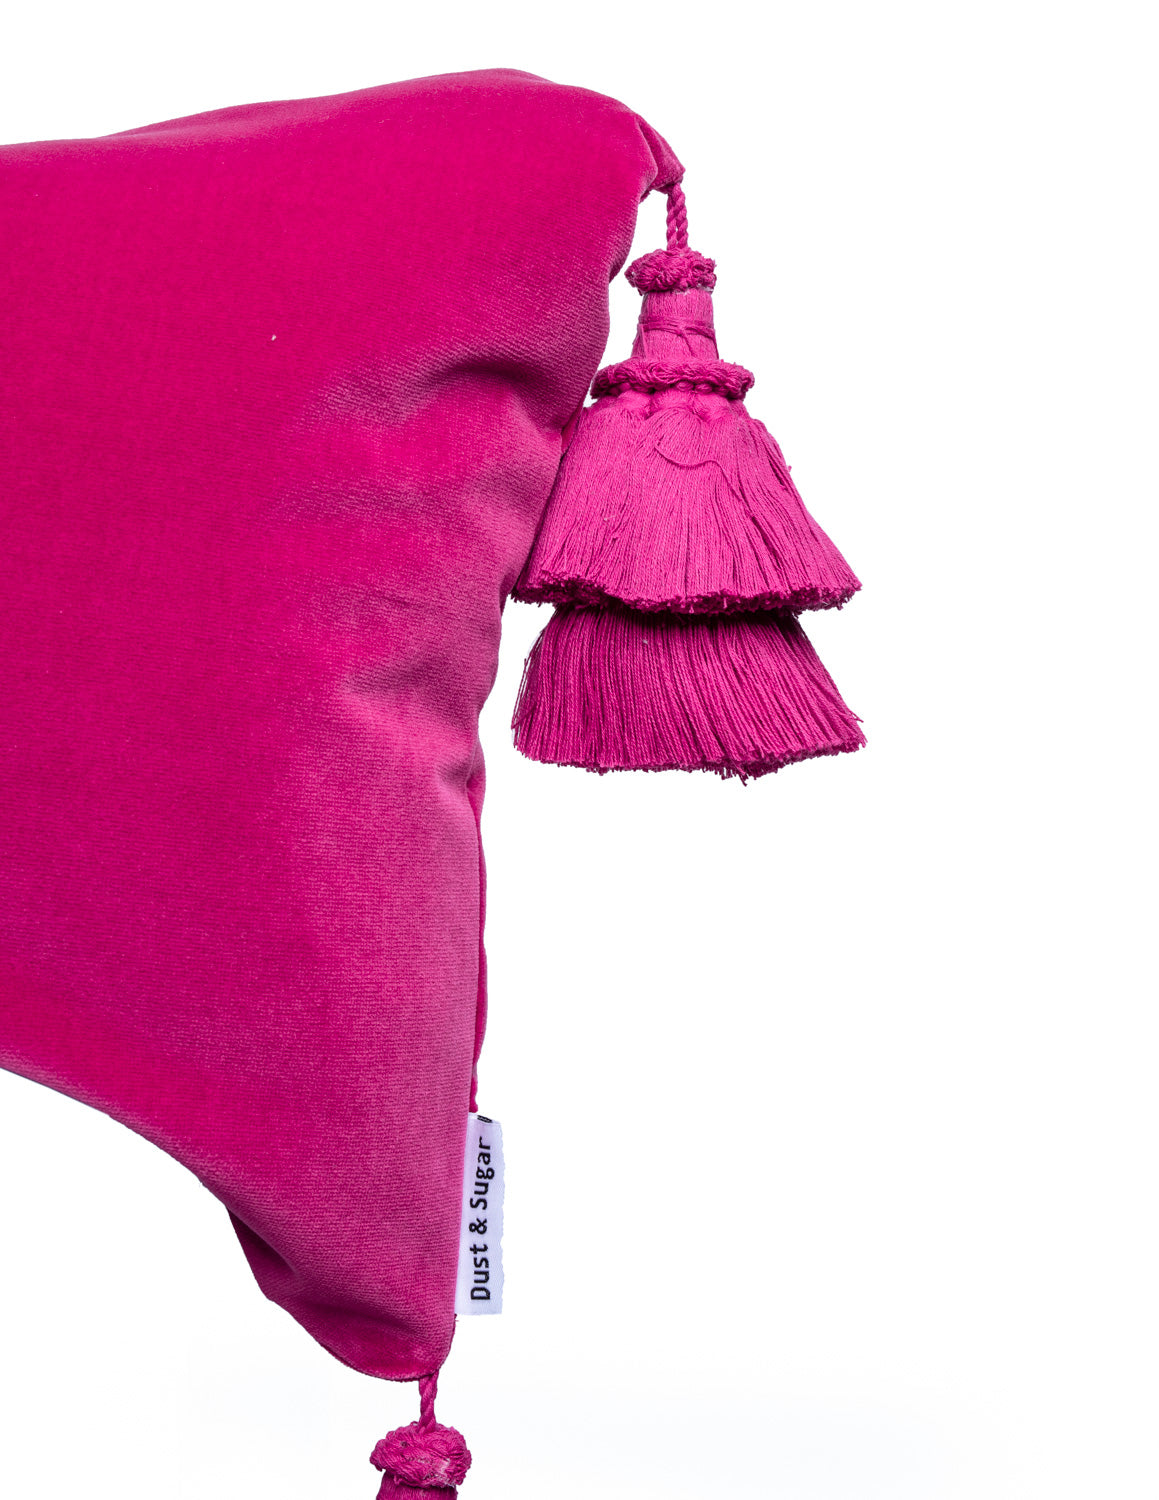 Magenta Pink Pillow Cover With Handmade Tassels